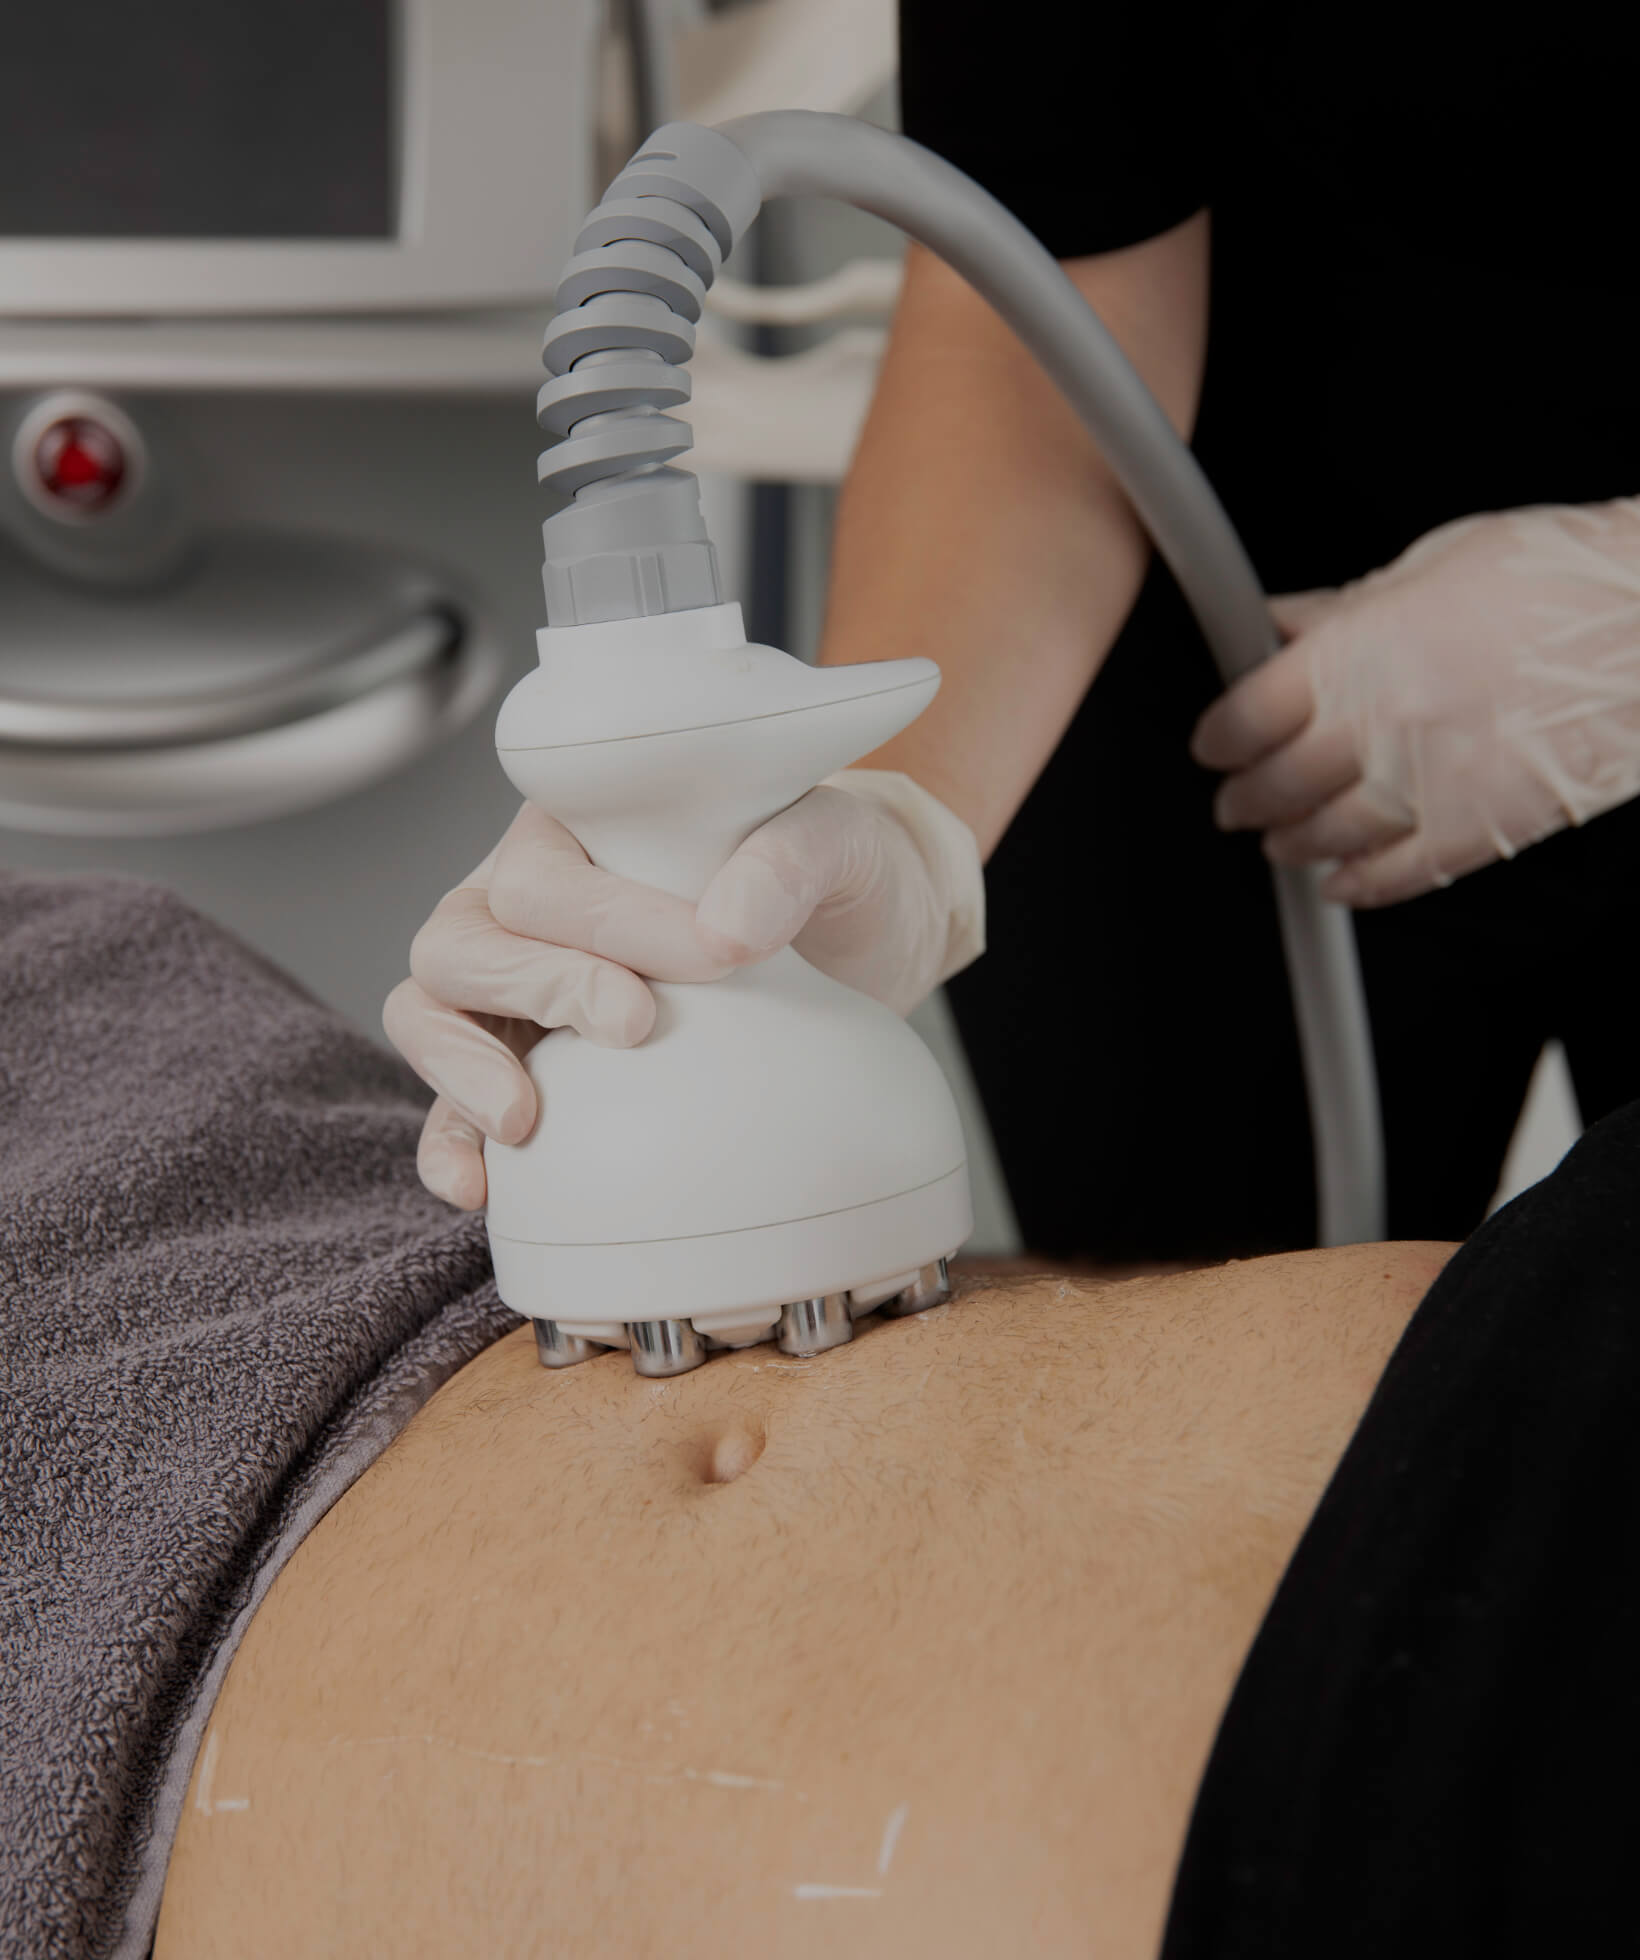 A technician from Clinique Chloé sliding the Venus Legacy radiofrequency handpiece onto a patient's abdomen